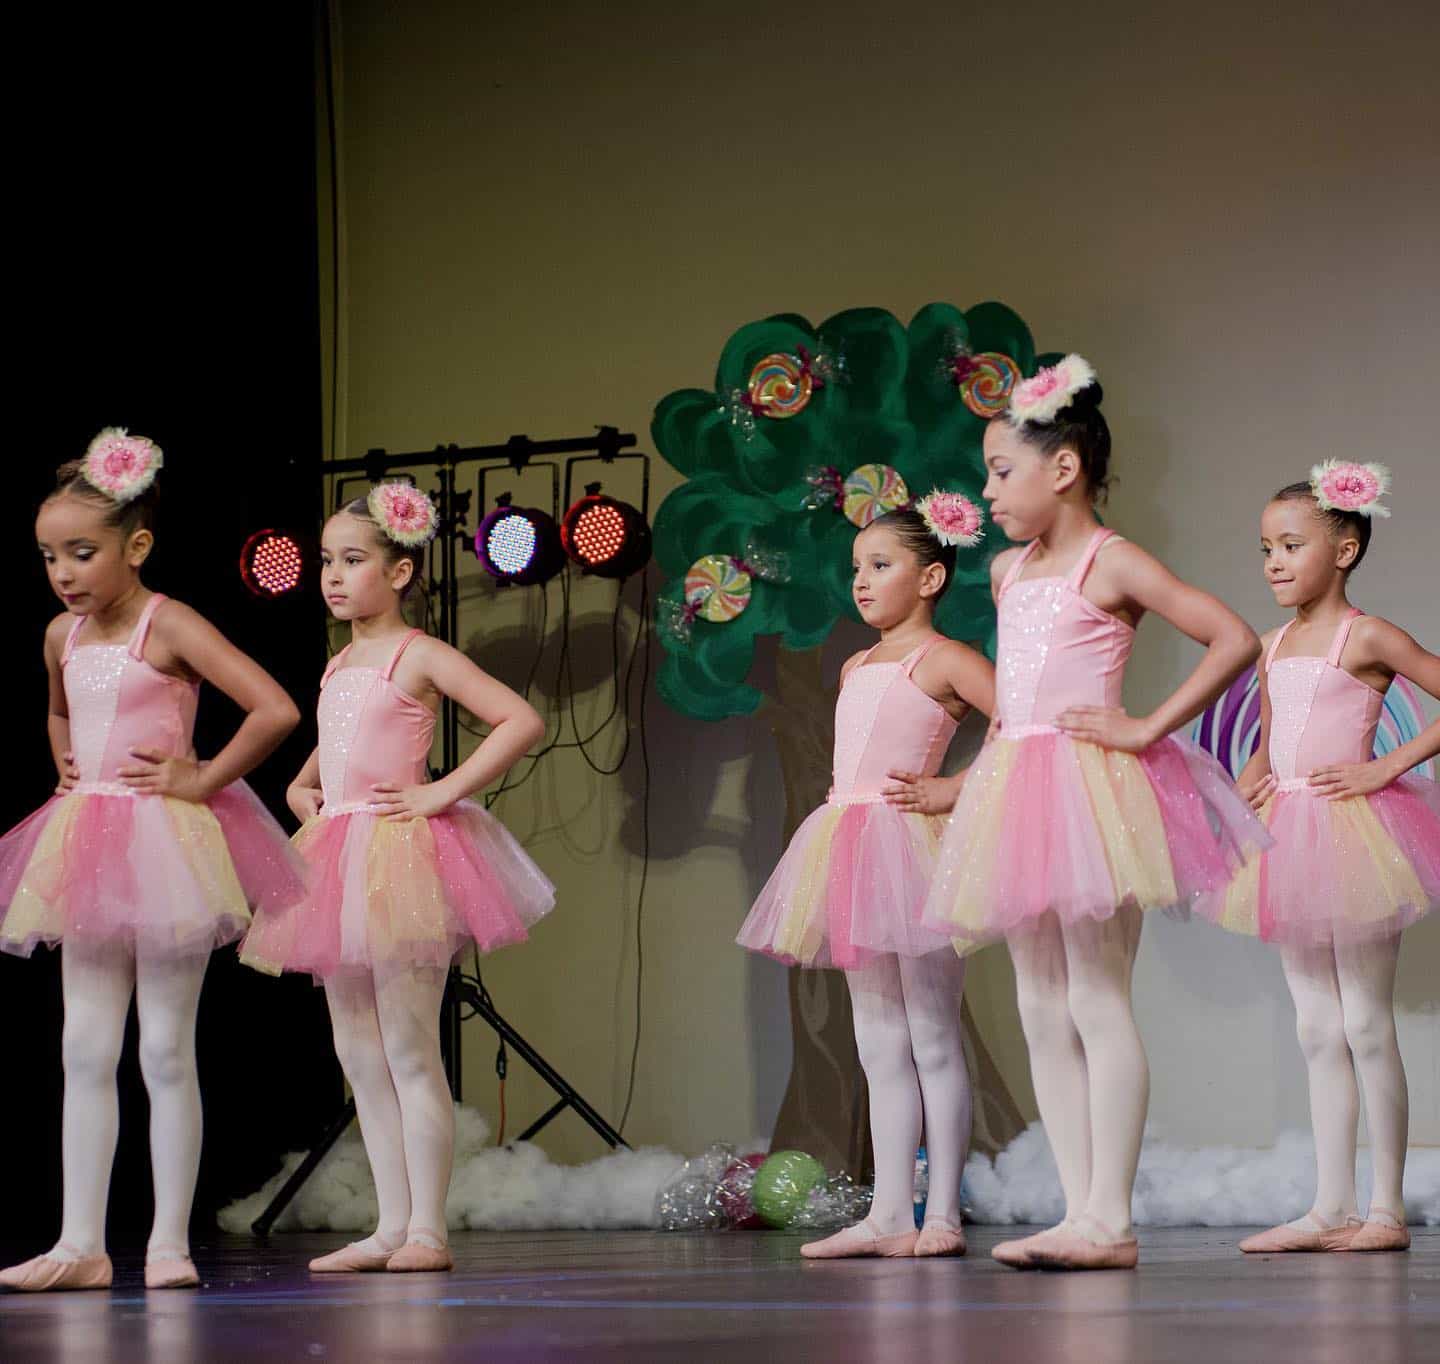 a group of girls in dresses and a green puppet on a stage